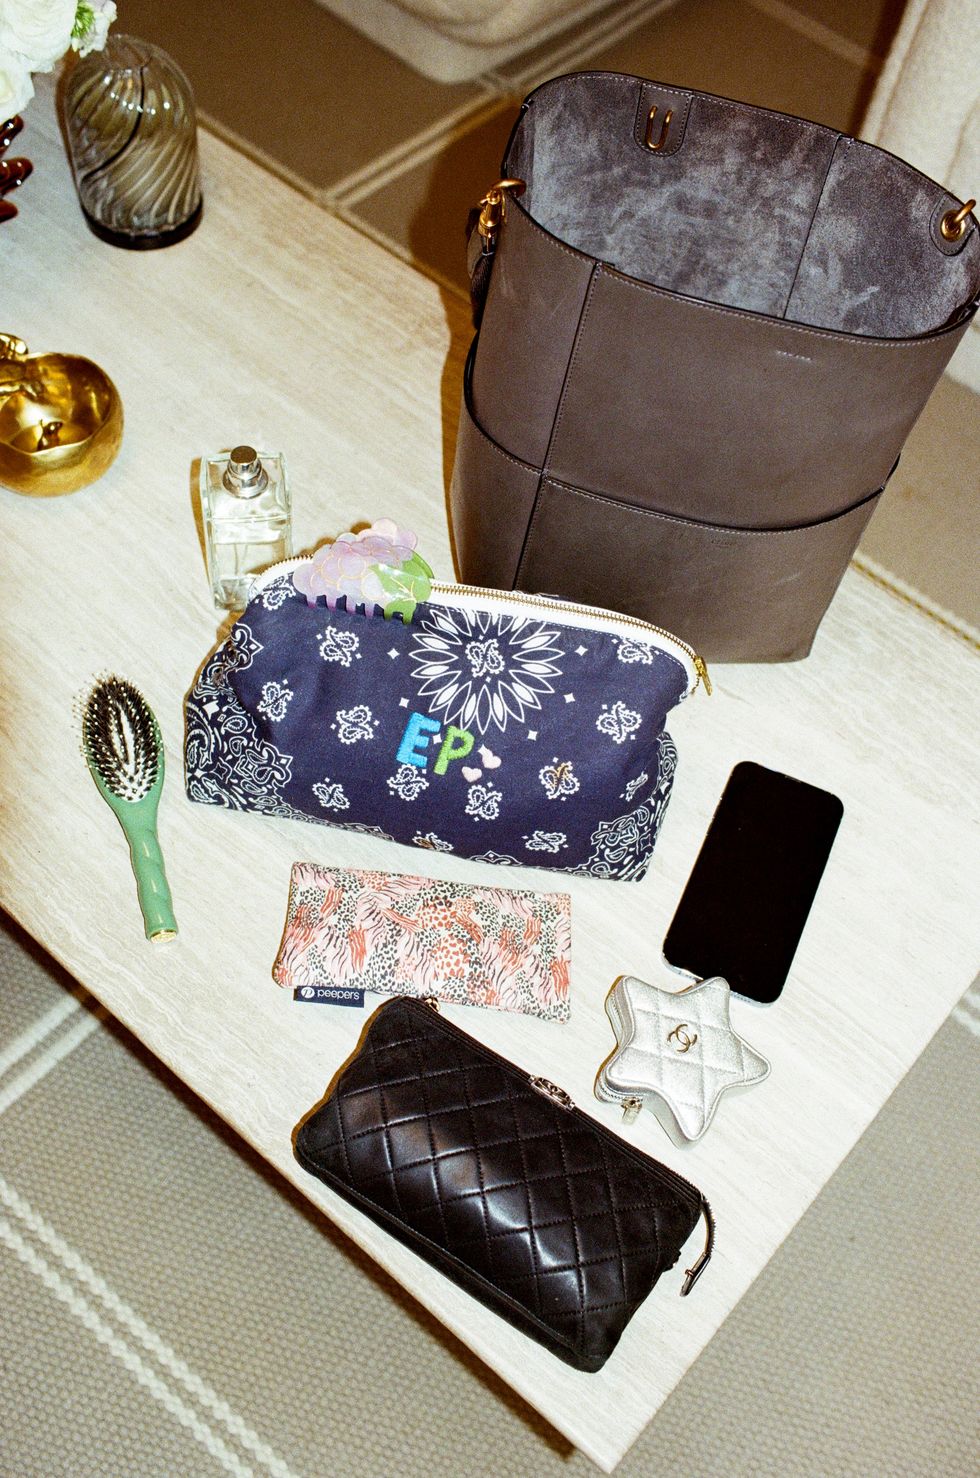 a purse and other items on a table